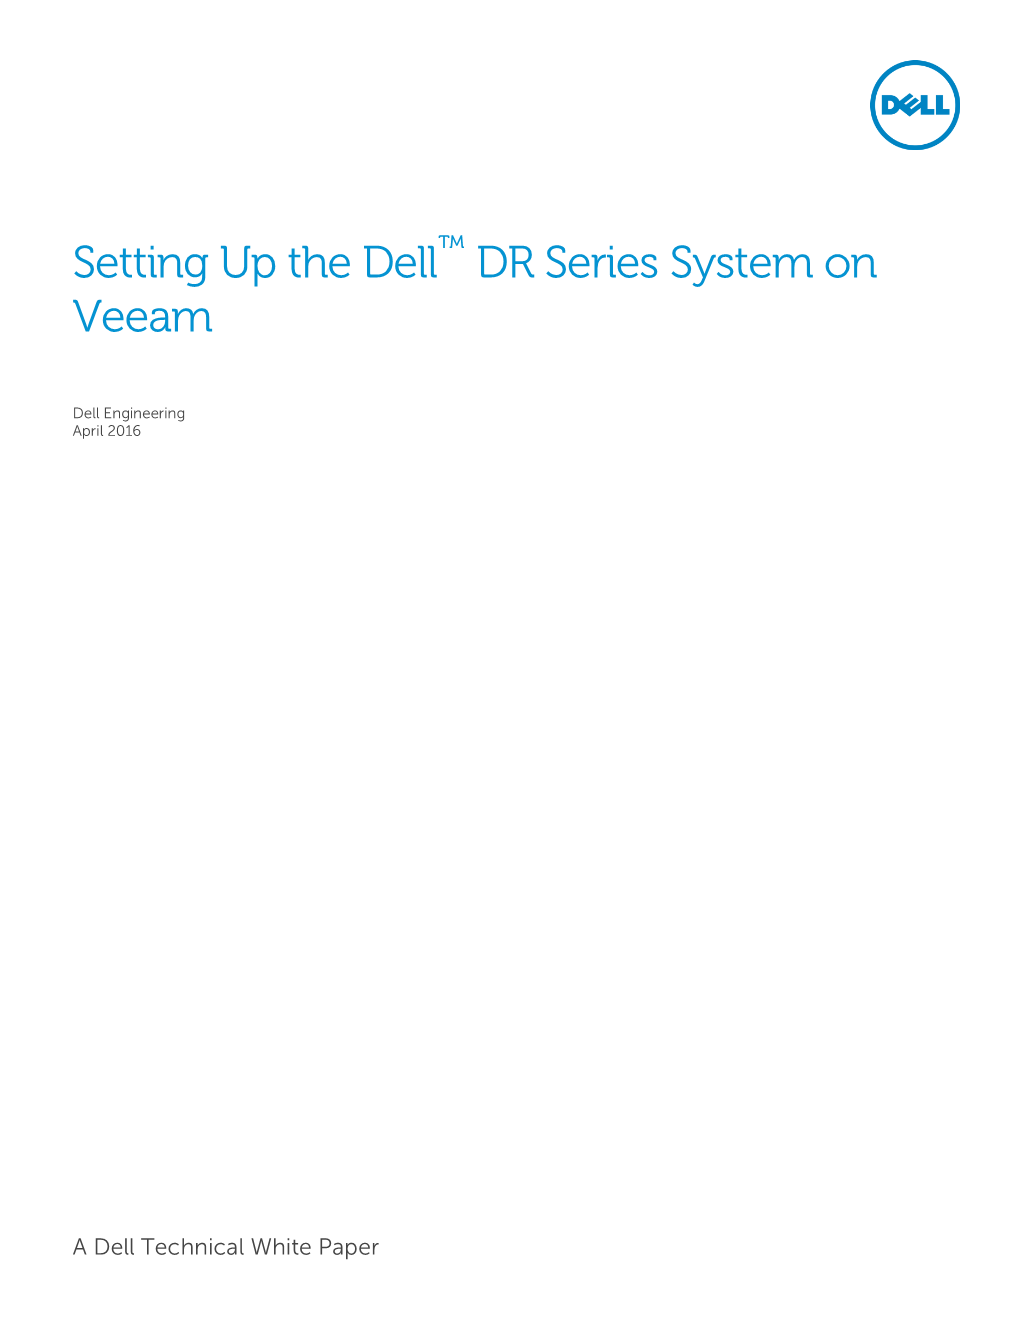 Setting up the Dell DR Series System on Veeam